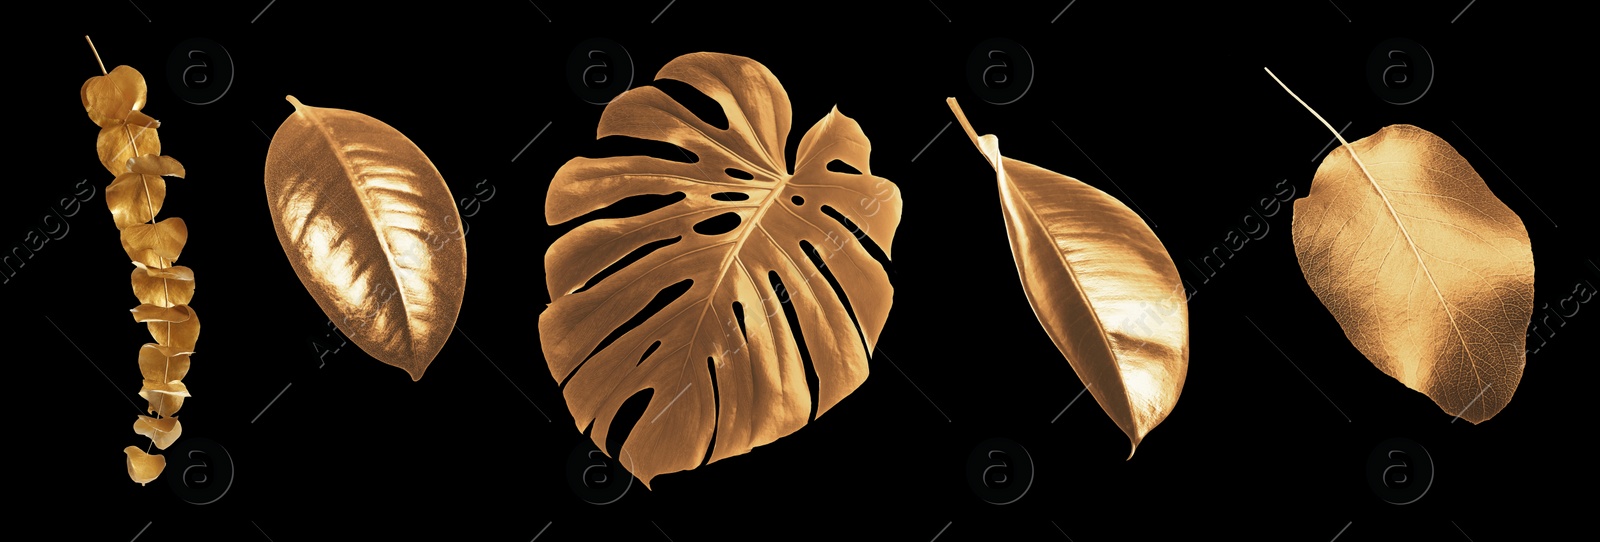 Image of Collage with different gold painted leaves on black background, banner design